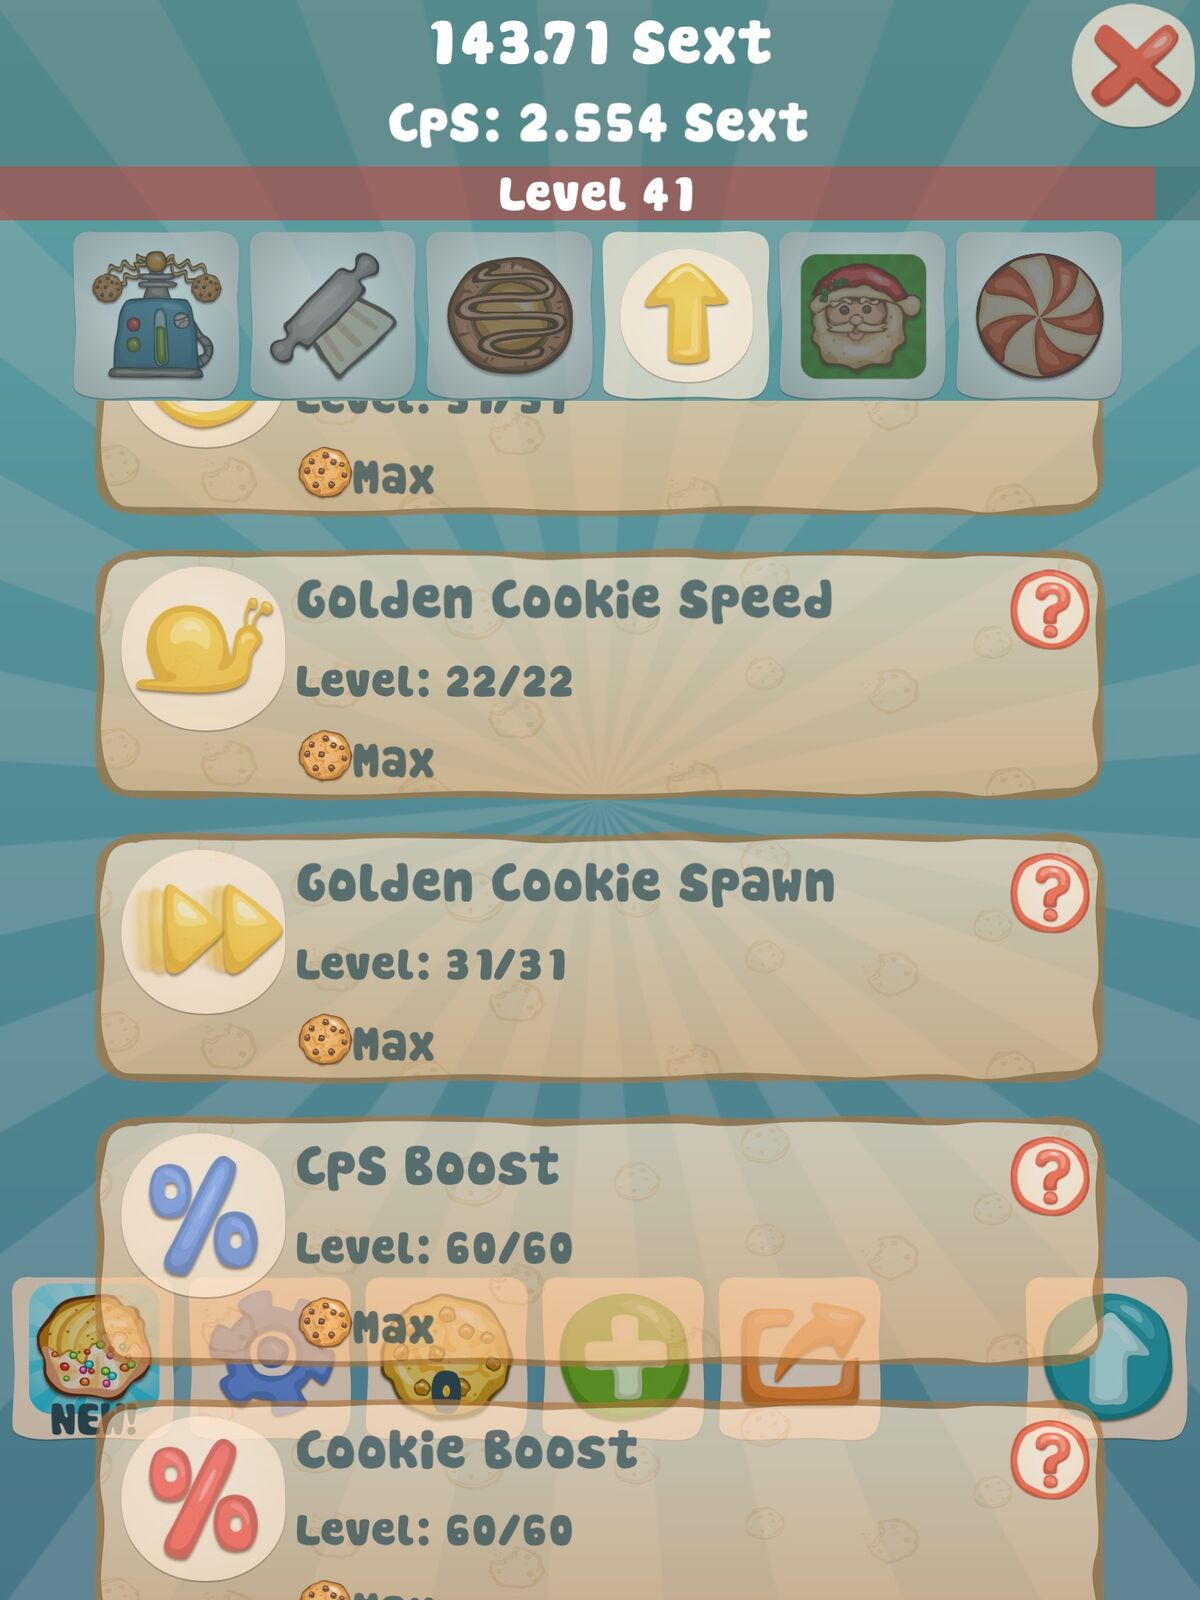 randomly got the chance of 2 golden cookies spawning; one being an